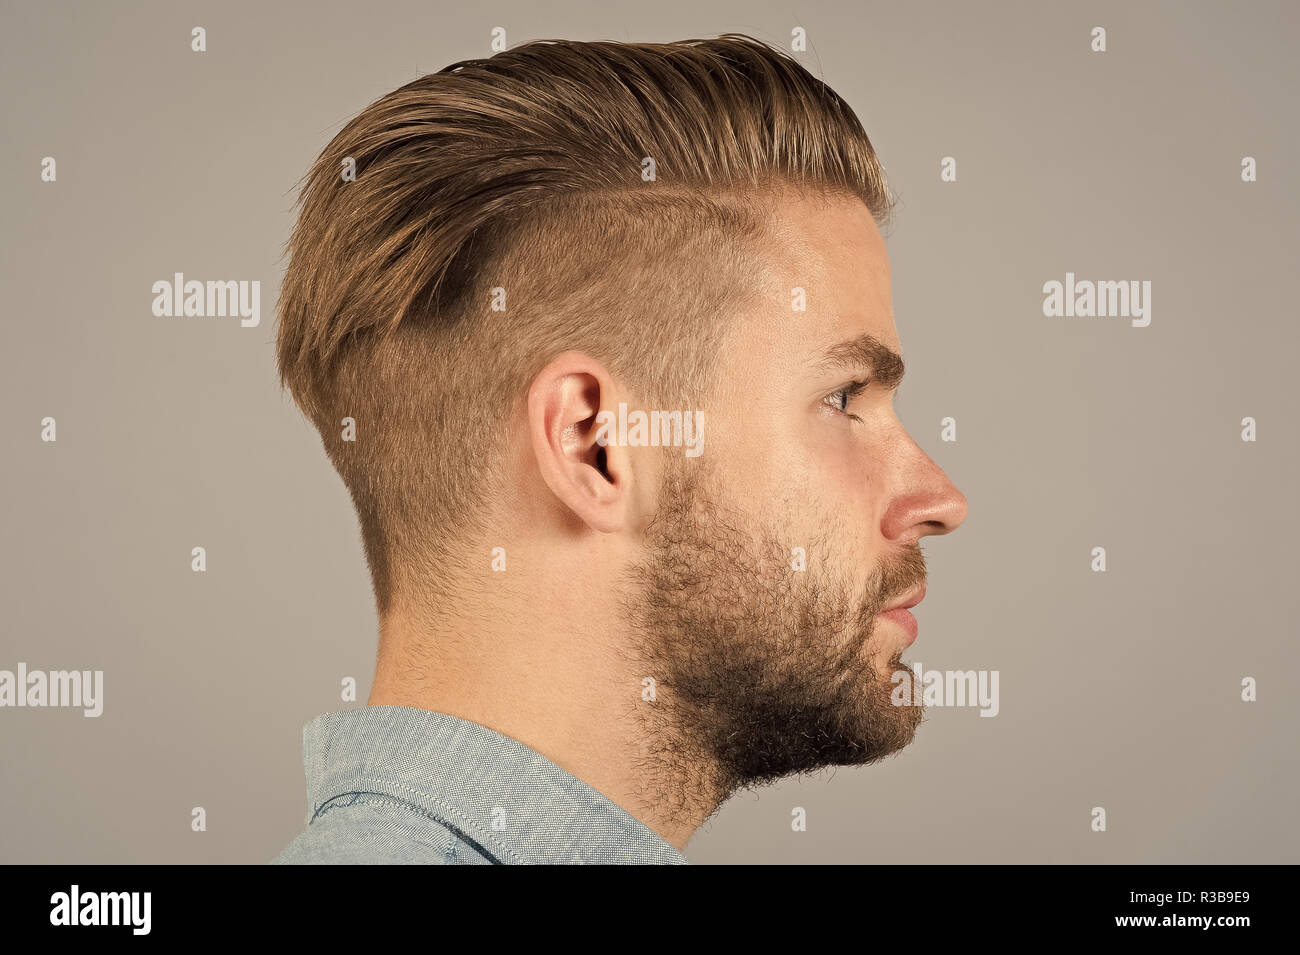 Man with beard on unshaven face profile. Macho with stylish hair, haircut  on grey background. Barbershop, barber salon. Grooming, male beauty  concept. Fashion, style, trend Stock Photo - Alamy